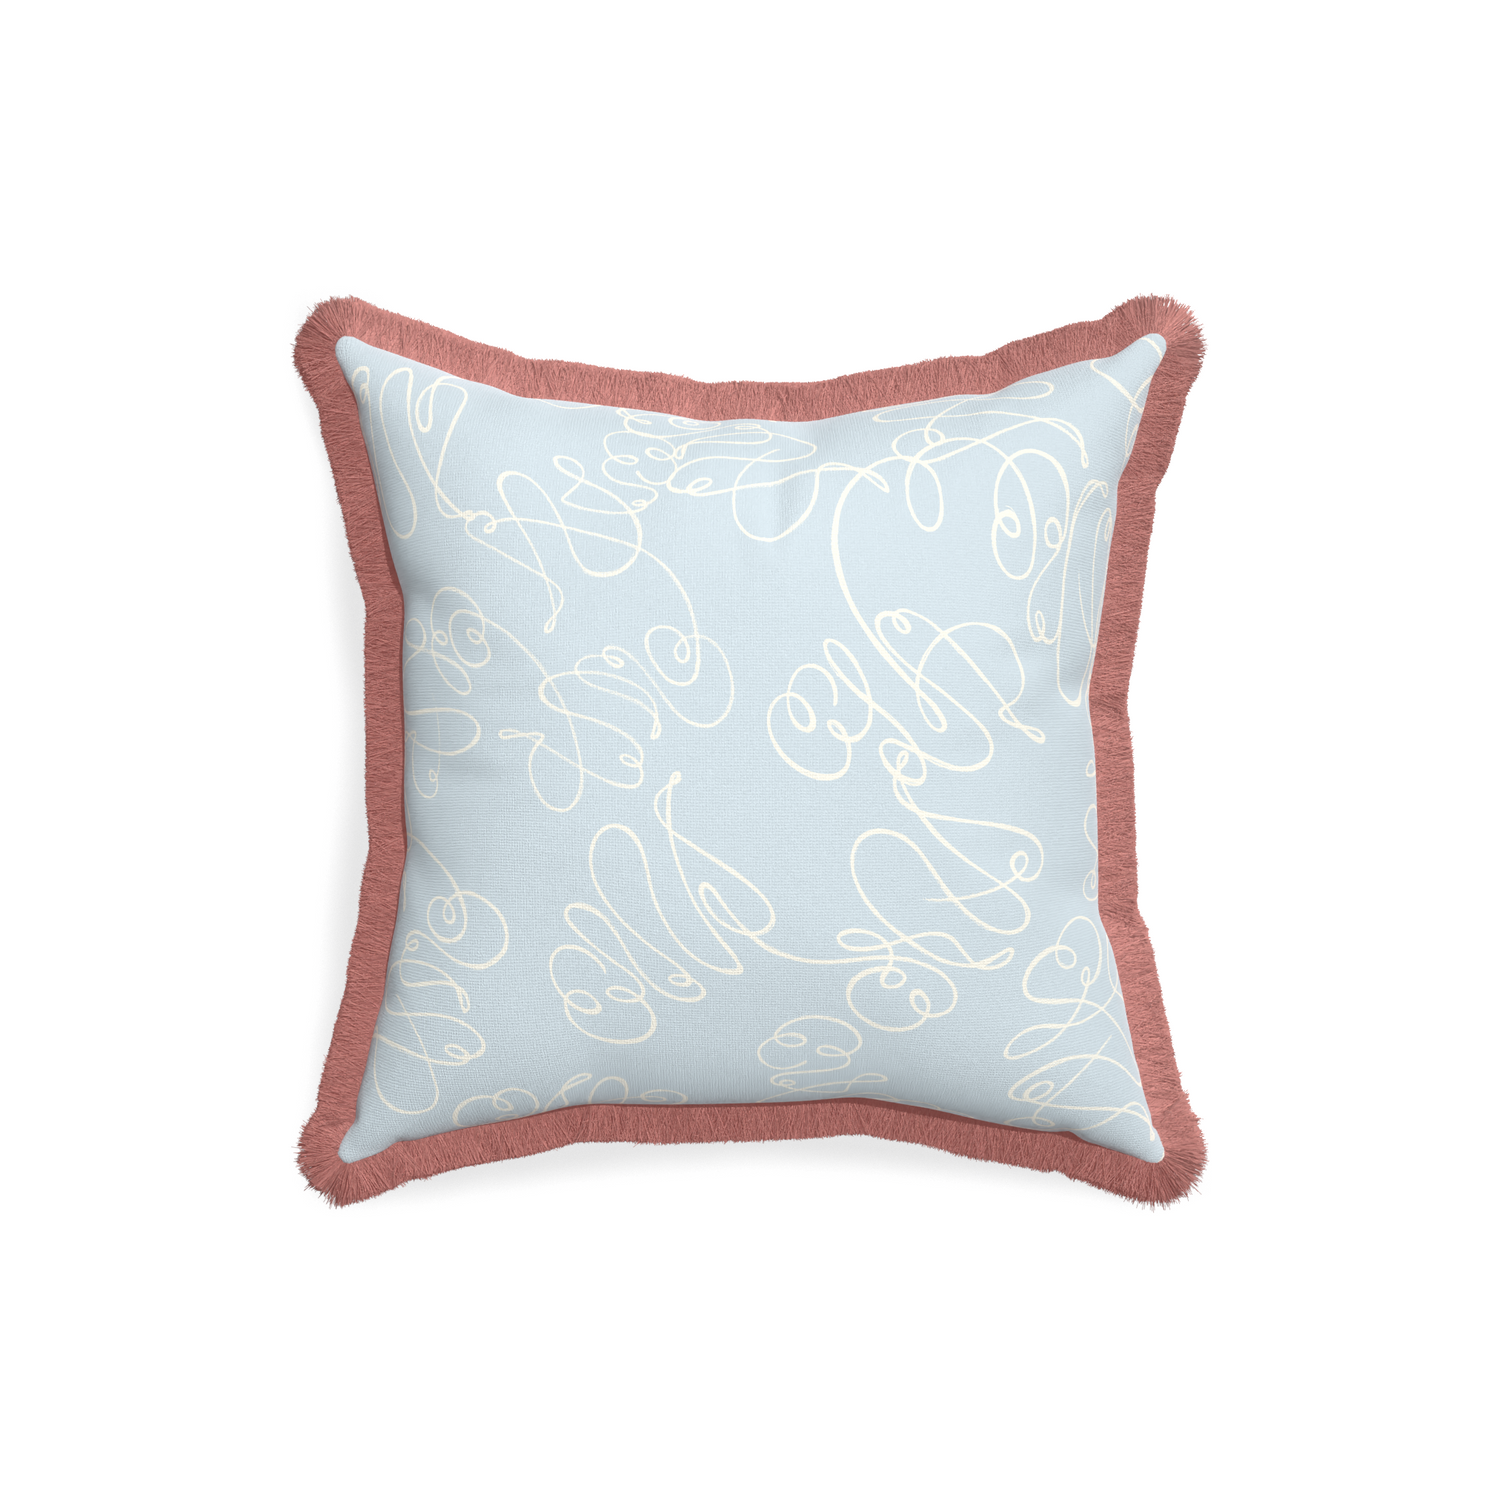 18-square mirabella custom powder blue abstractpillow with d fringe on white background